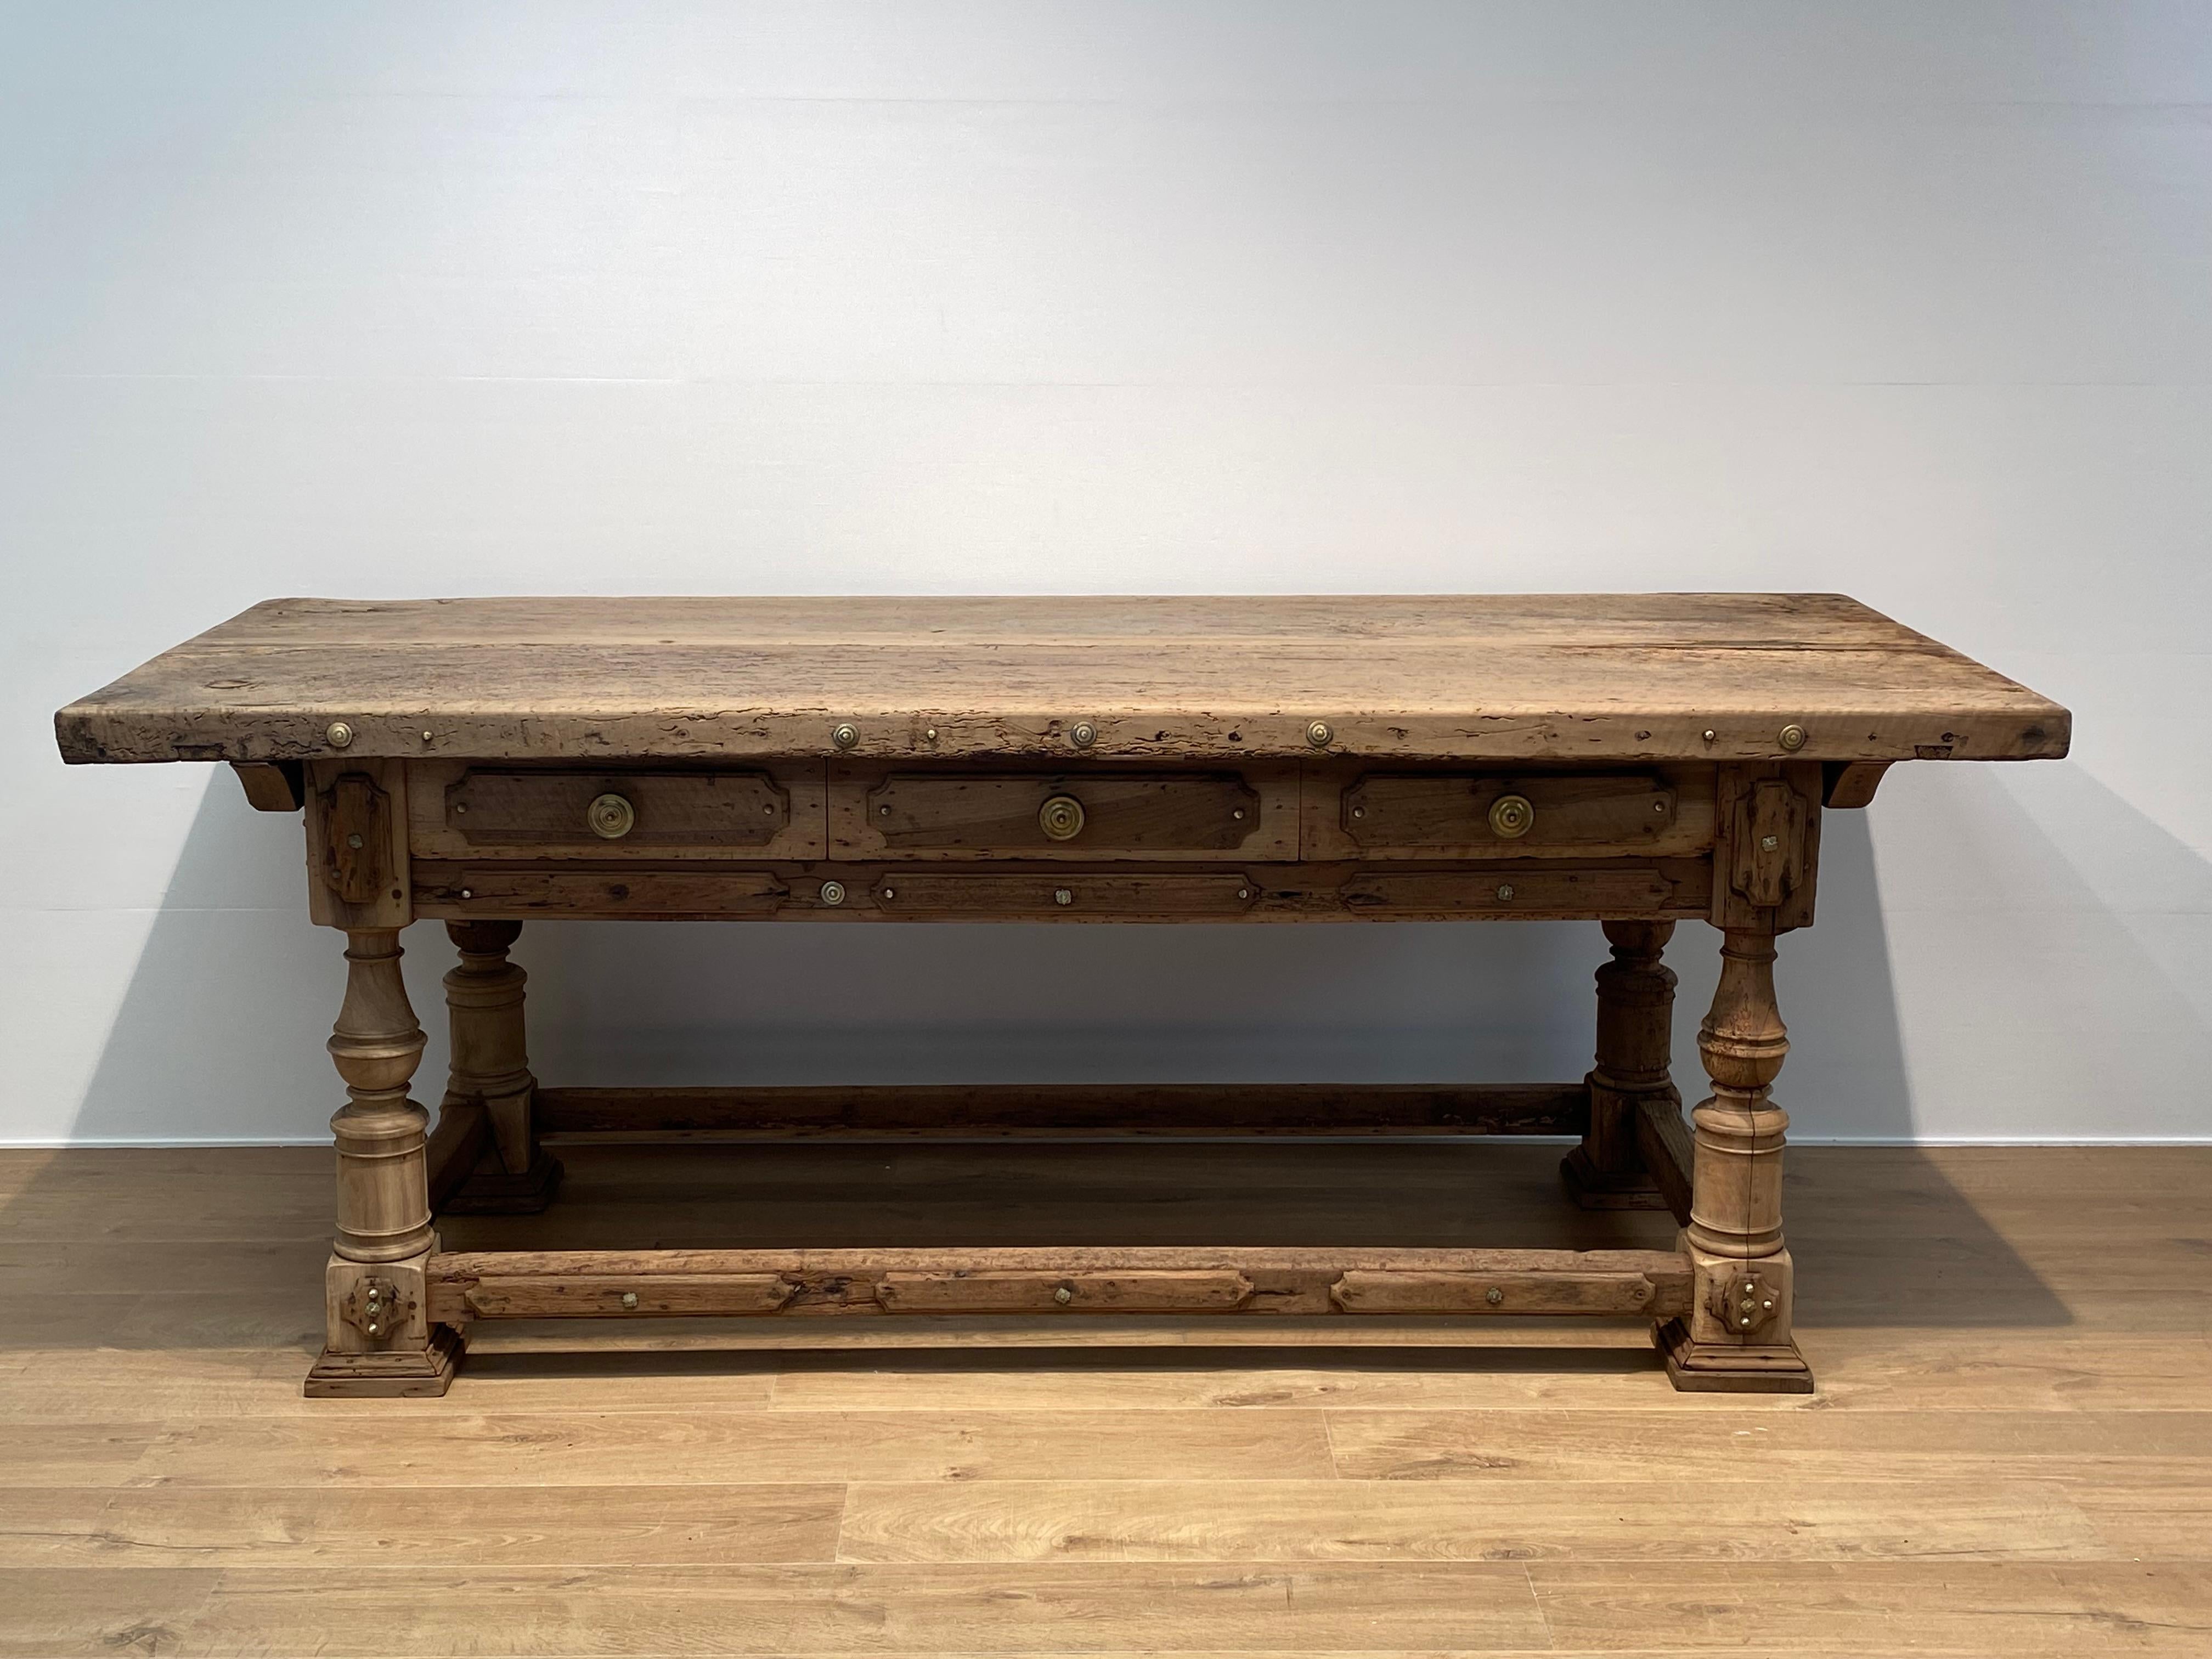 Exceptional and Brutalist antique Table from Italy from Bologna,
dating from the 17 Th Century,bleached ,made out of Oak and Walnut And Poplar Wood,
the table is richly decorated and has its original metal decorations and handles, the table has also